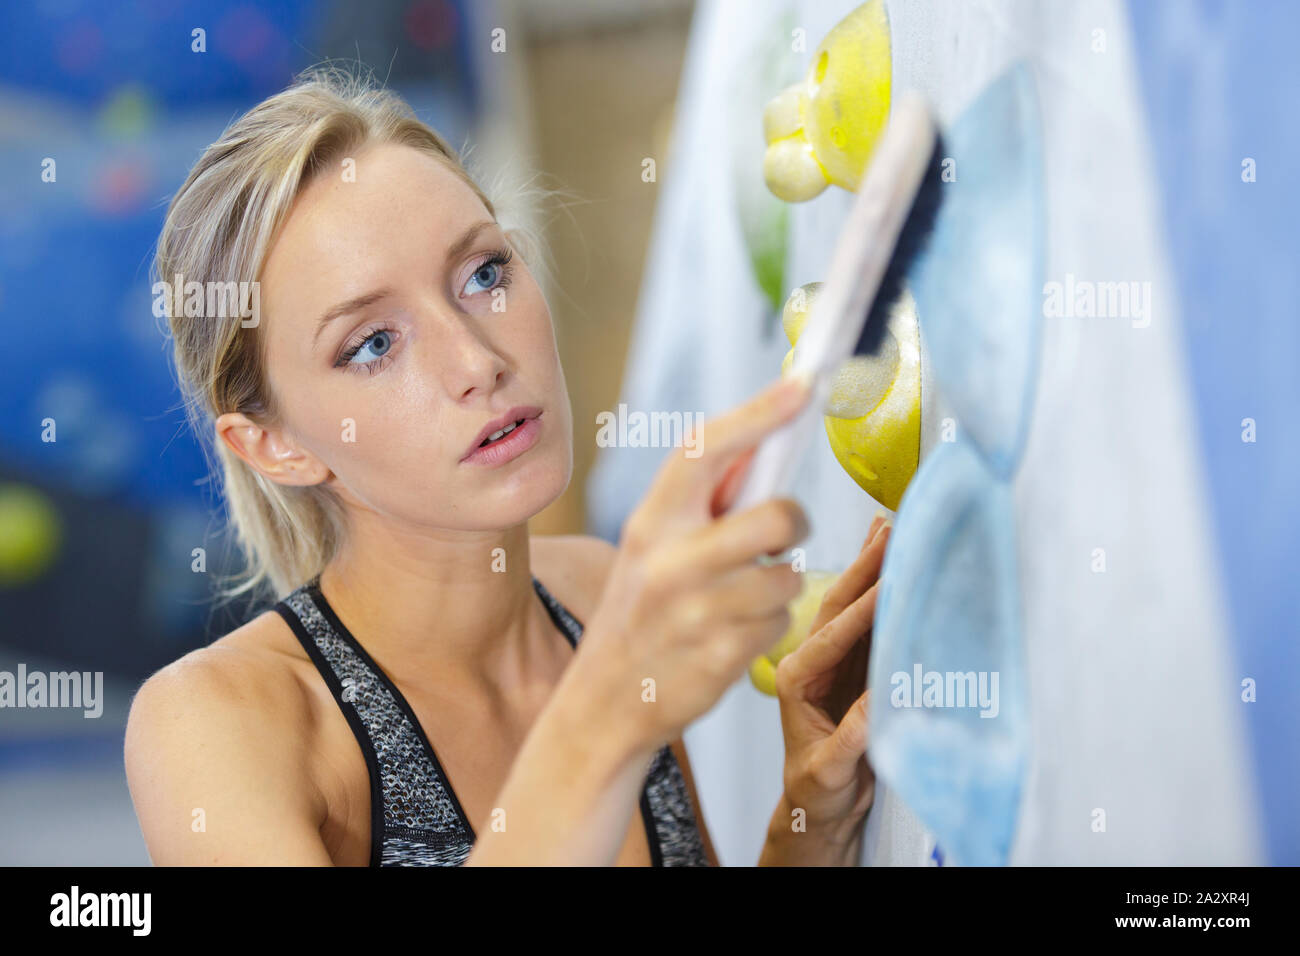 wall climbing center worker brushing the foothold Stock Photo